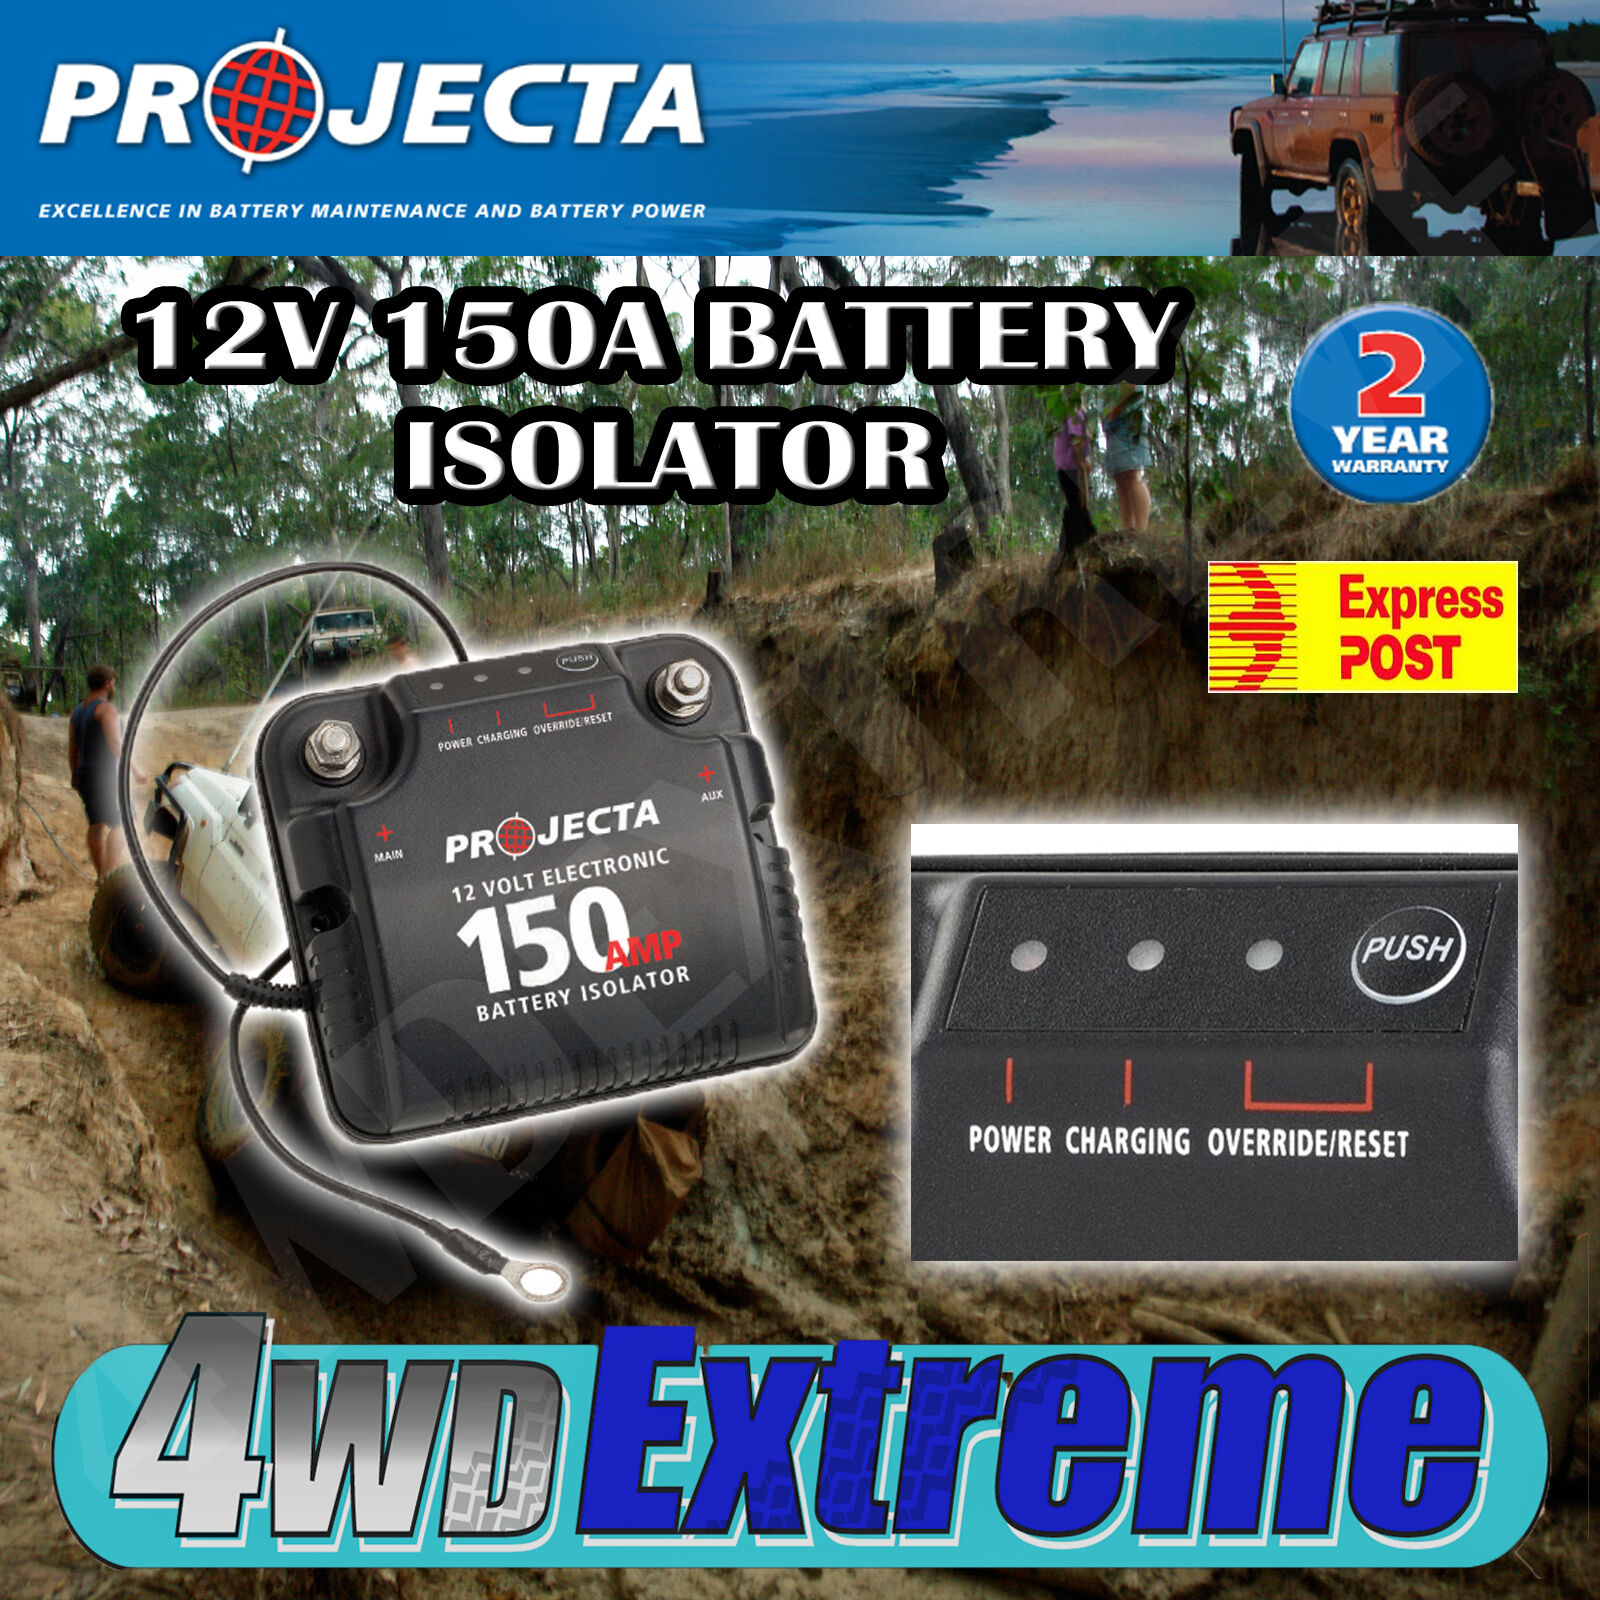 PROJECTA DBC150 12V 150A DUAL BATTERY SYSTEM ISOLATOR DEEP CYCLE AGM, AUXILLARY